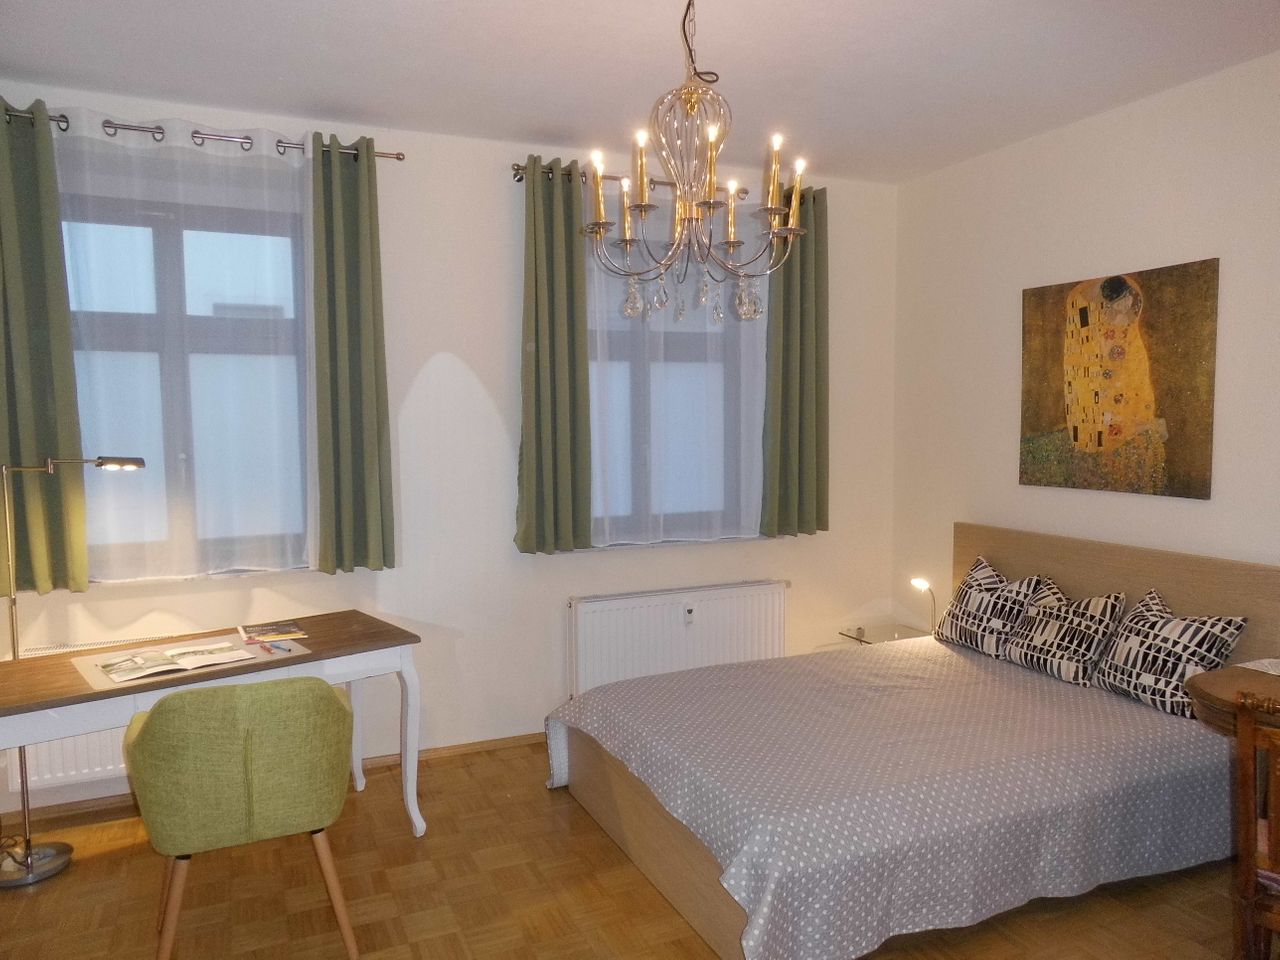 Top apartment in absolute prime location in the center of Leipzig: in 10 minutes walk through the Clara Park in the city center (WE03).